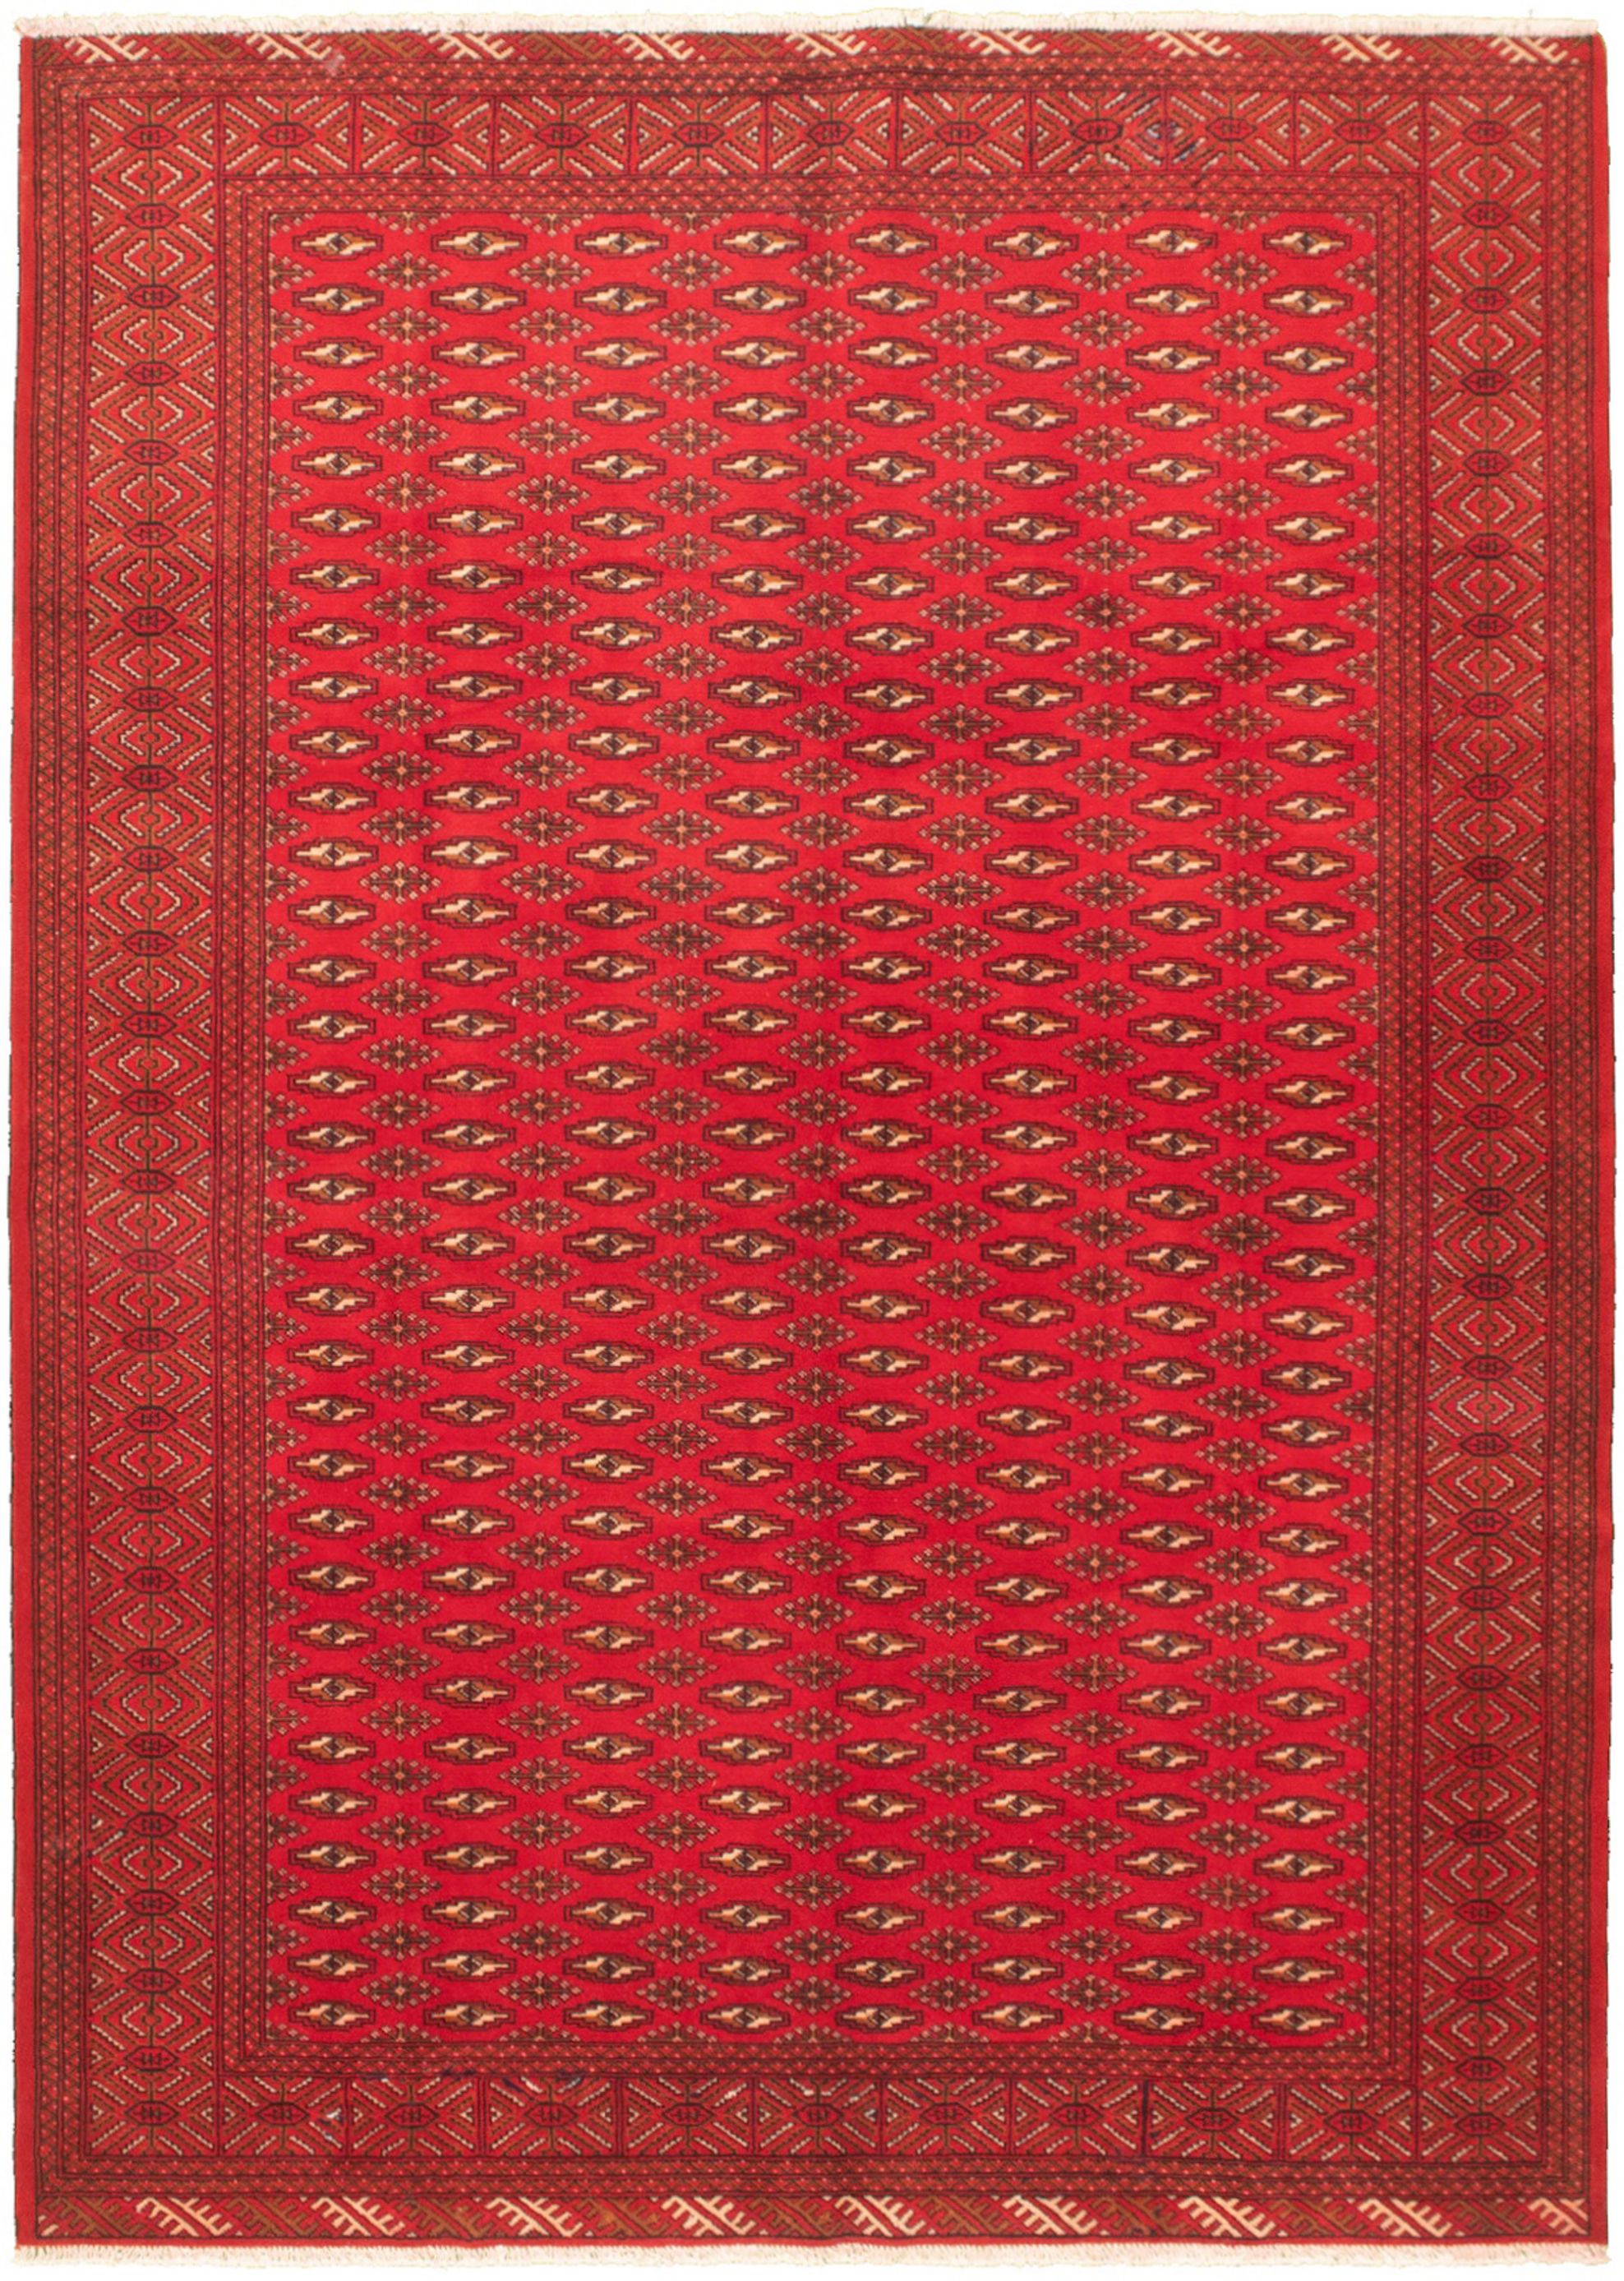 Hand-knotted Shiravan Bokhara Red Wool Rug 6'8" x 9'5"  Size: 6'8" x 9'5"  